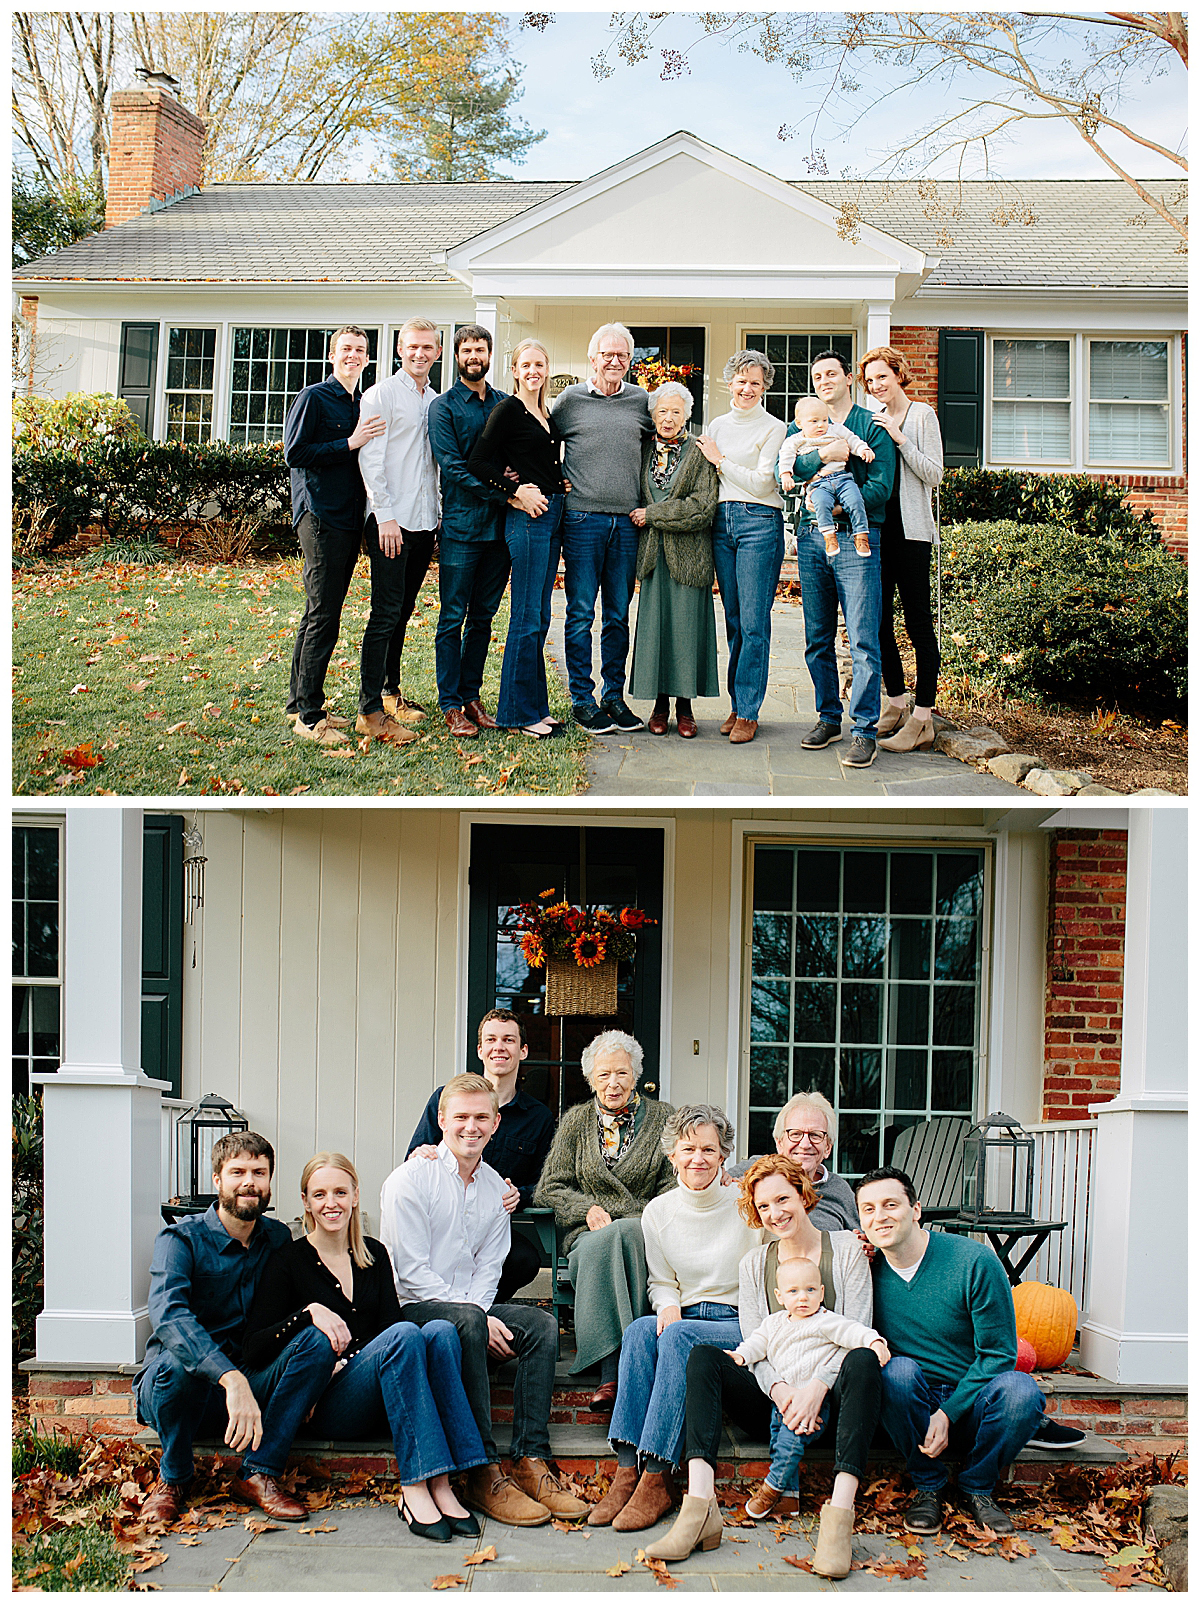 Tips for Photographing Large Family Portraits